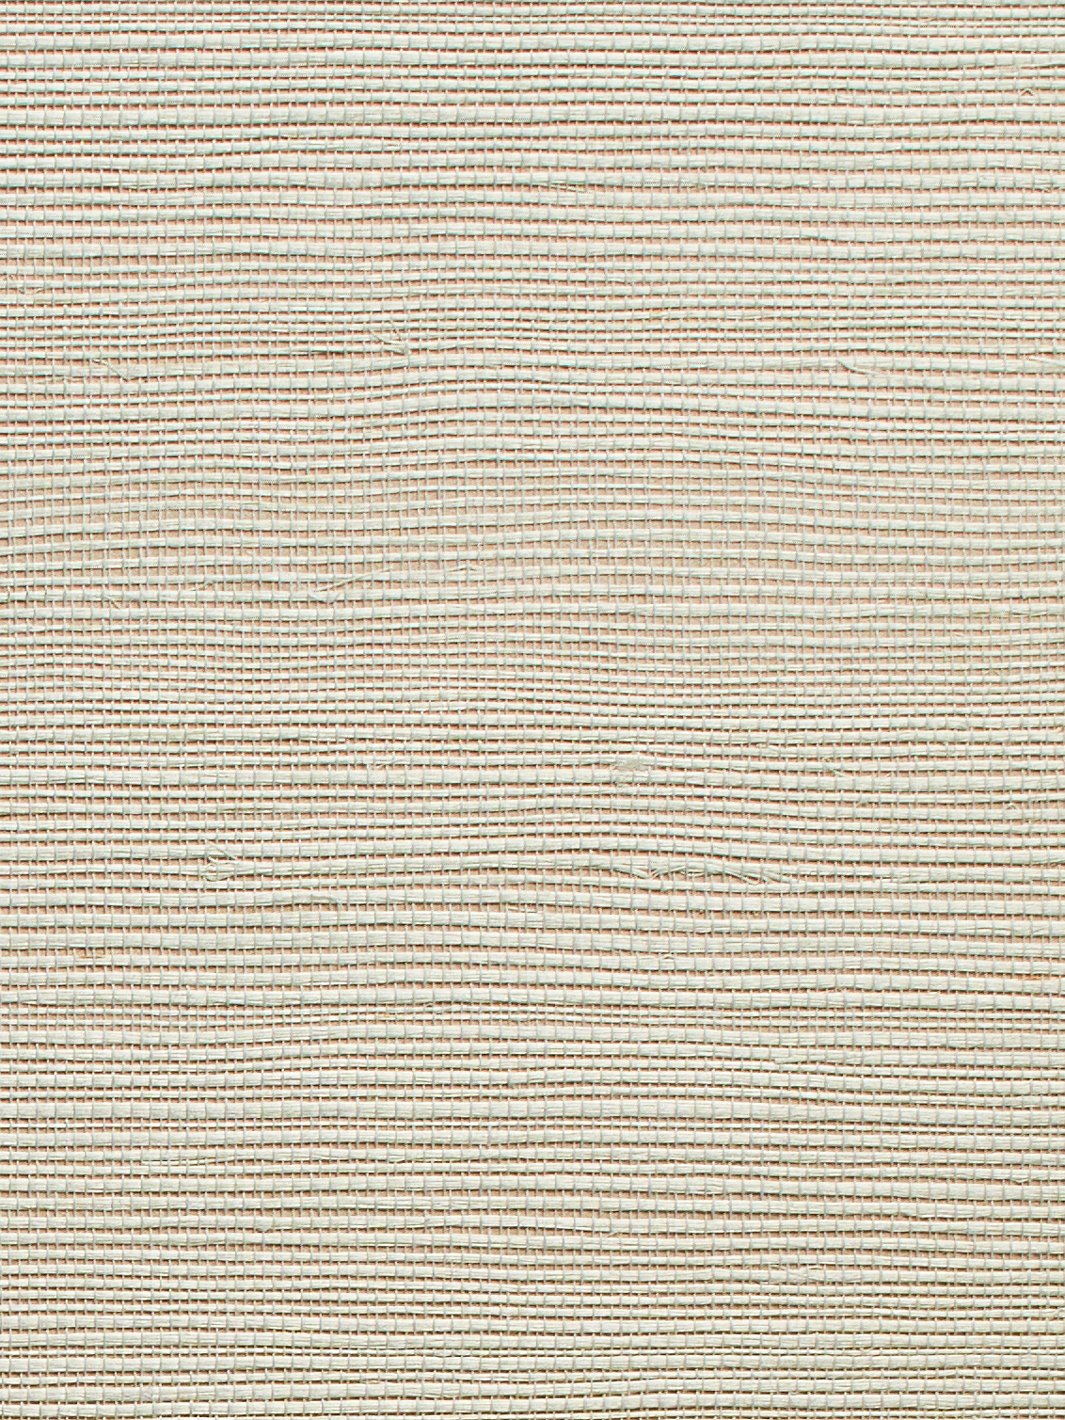 'Solid Grasscloth' Wallpaper by Wallshoppe - Natural